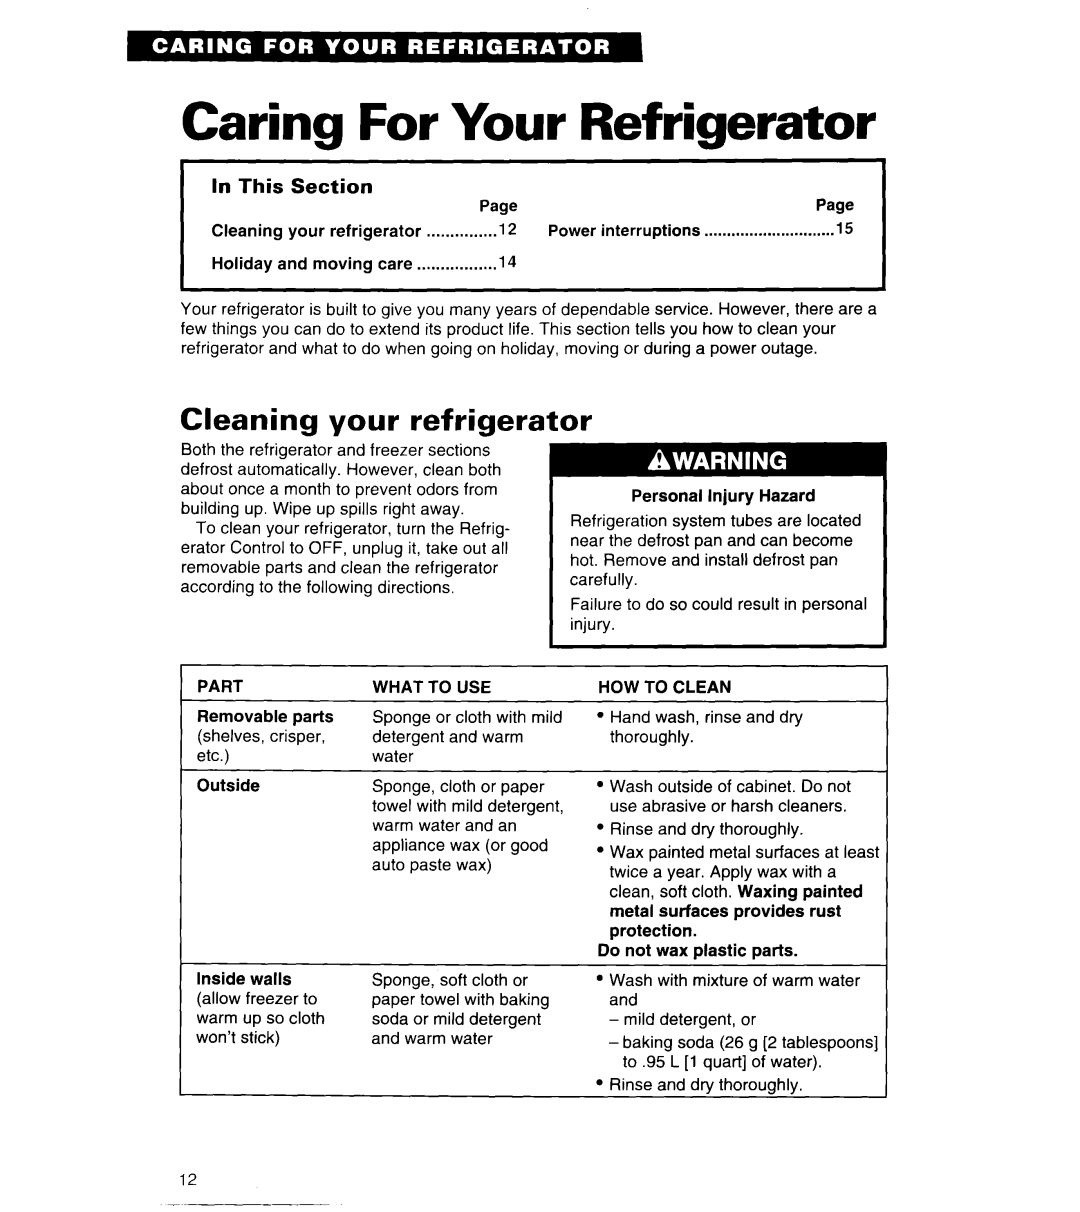 Whirlpool 4ET14GK important safety instructions Caring For Your Refrigerator, Cleaning your refrigerator, In This Section 